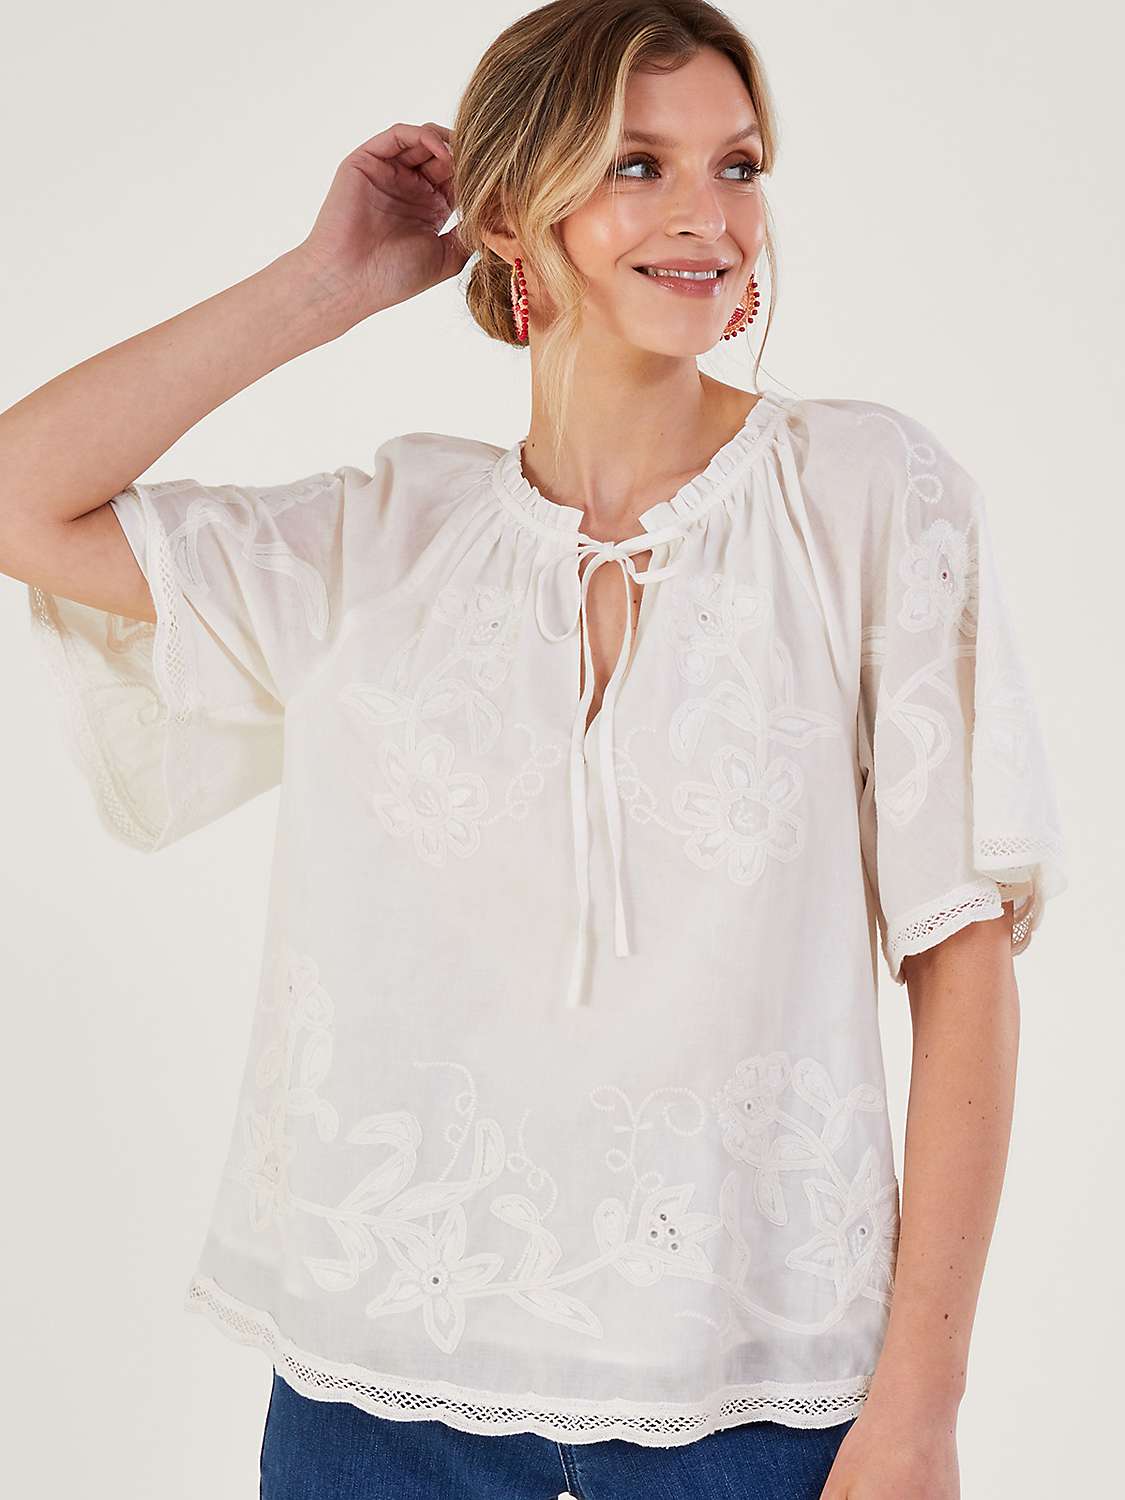 Monsoon Embroidered Short Sleeve Top, White at John Lewis & Partners